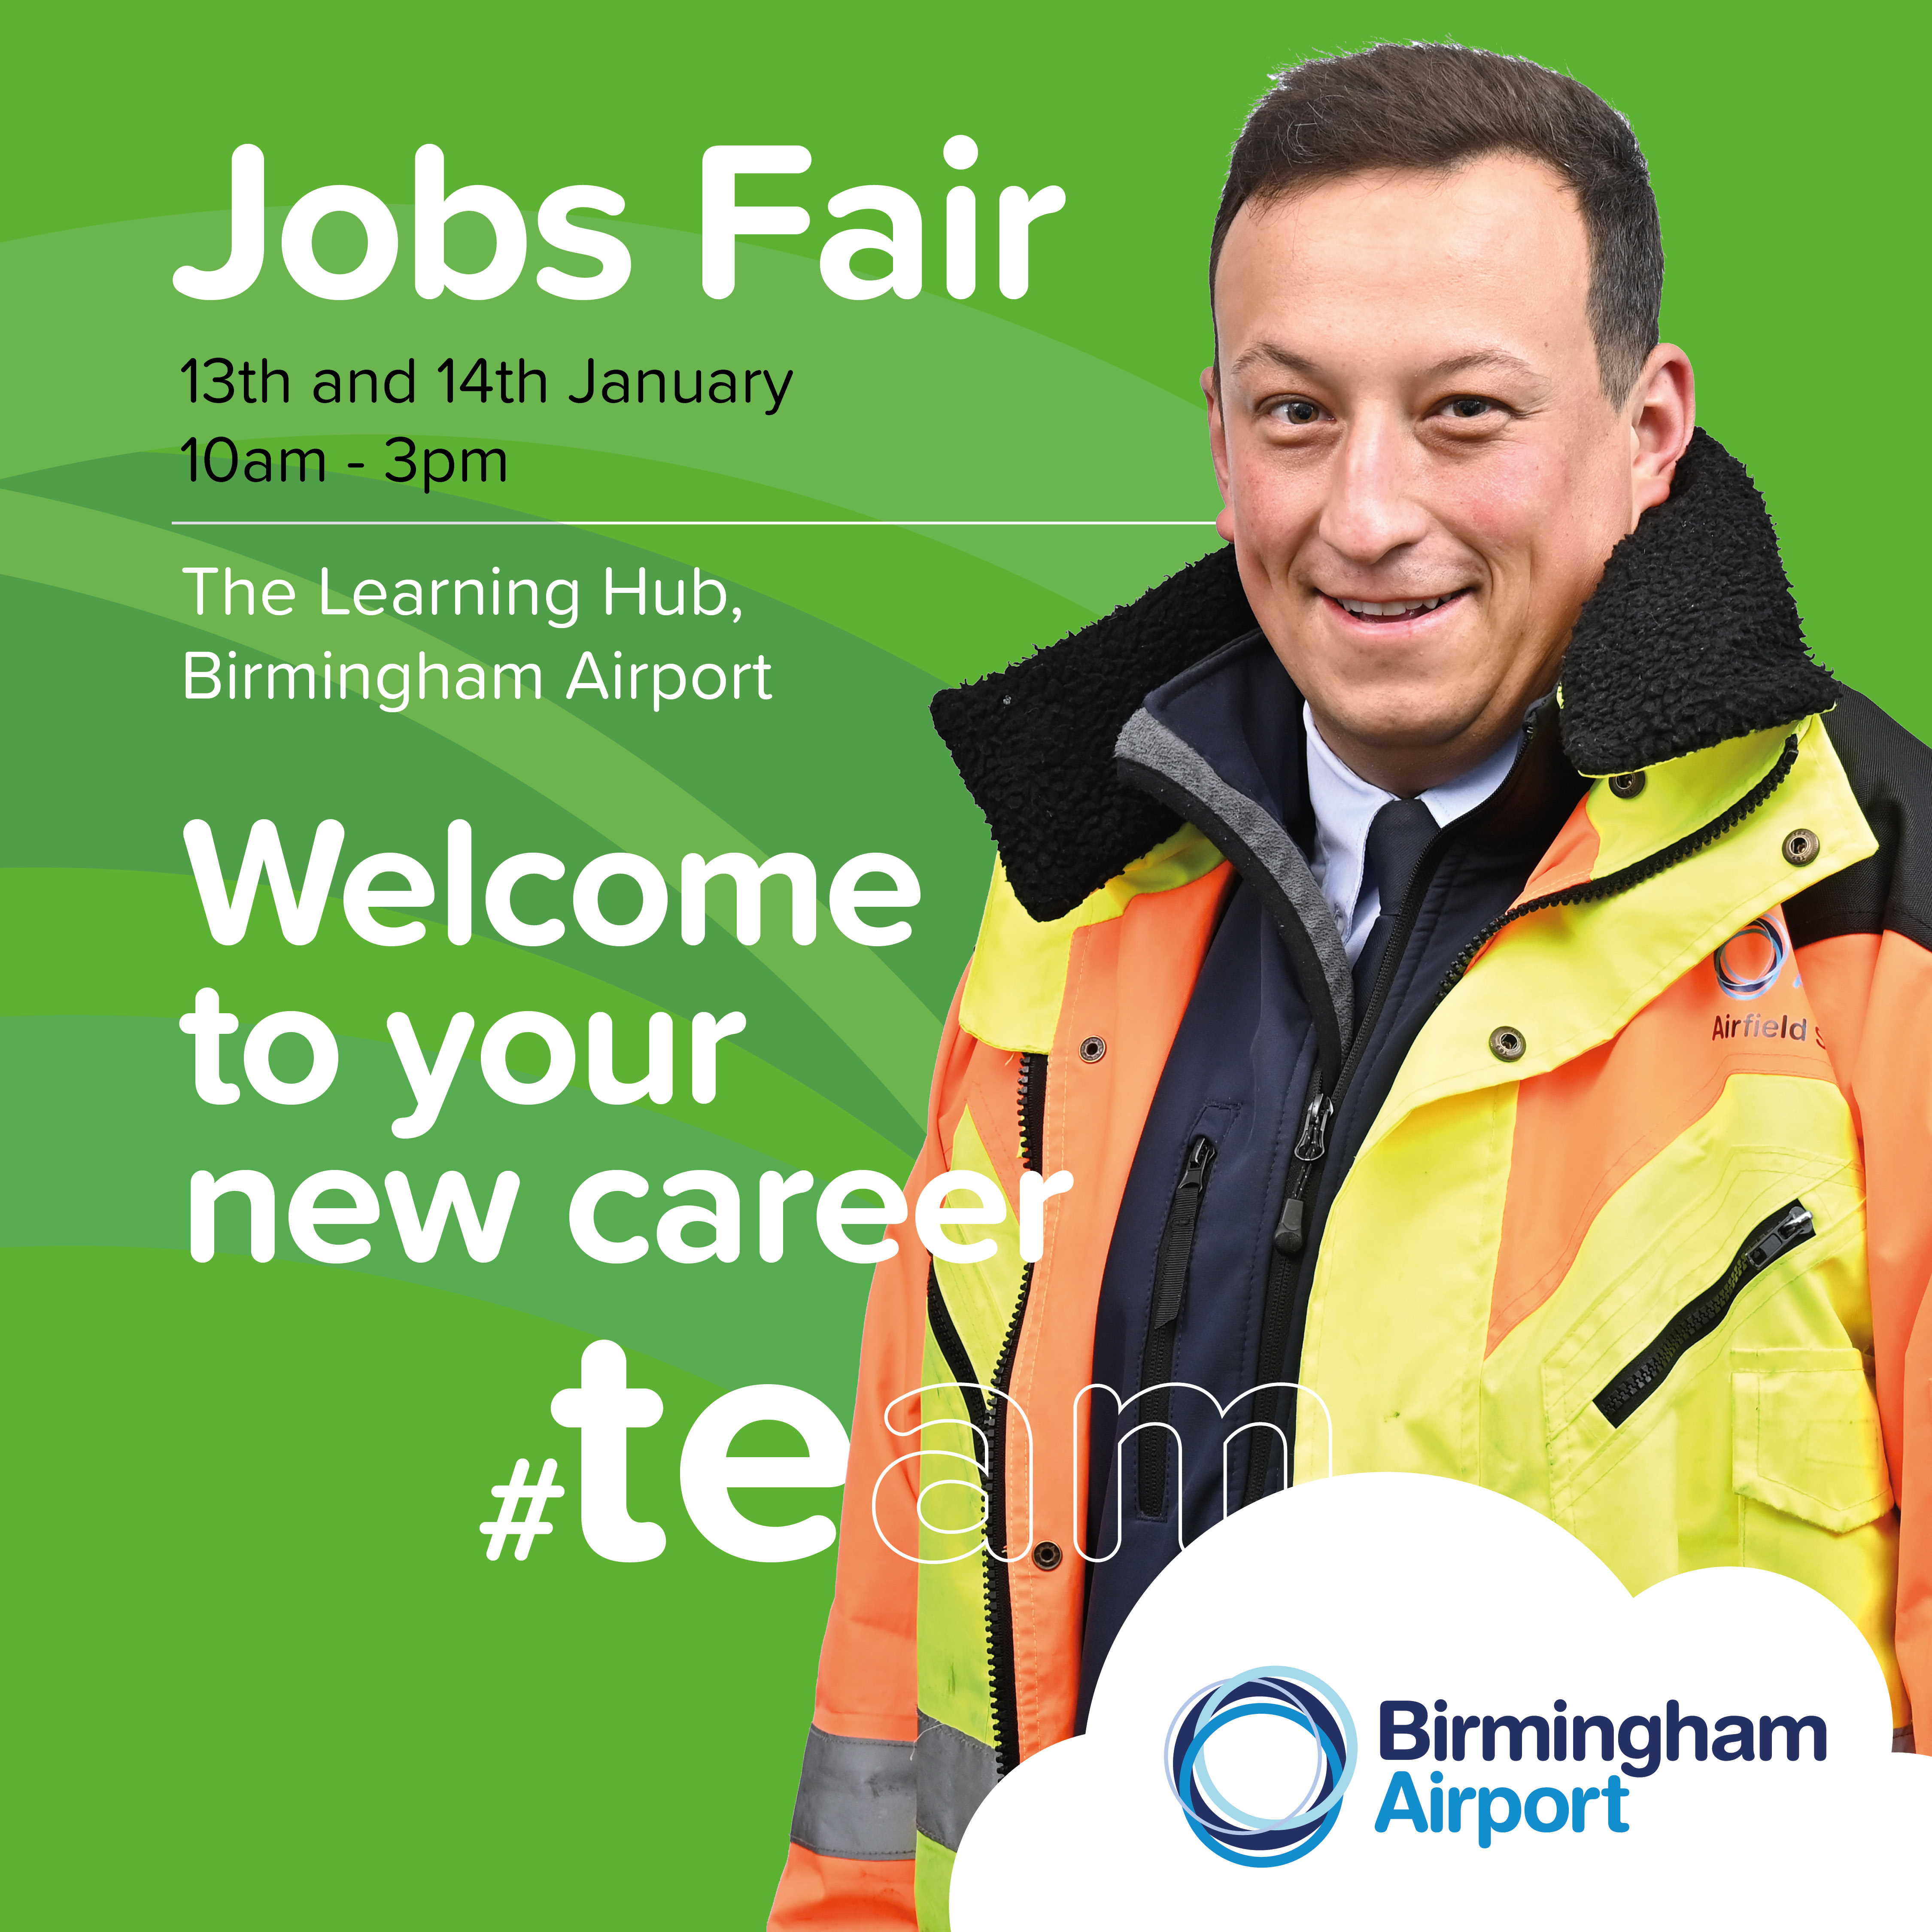 Get on board with Birmingham Airport